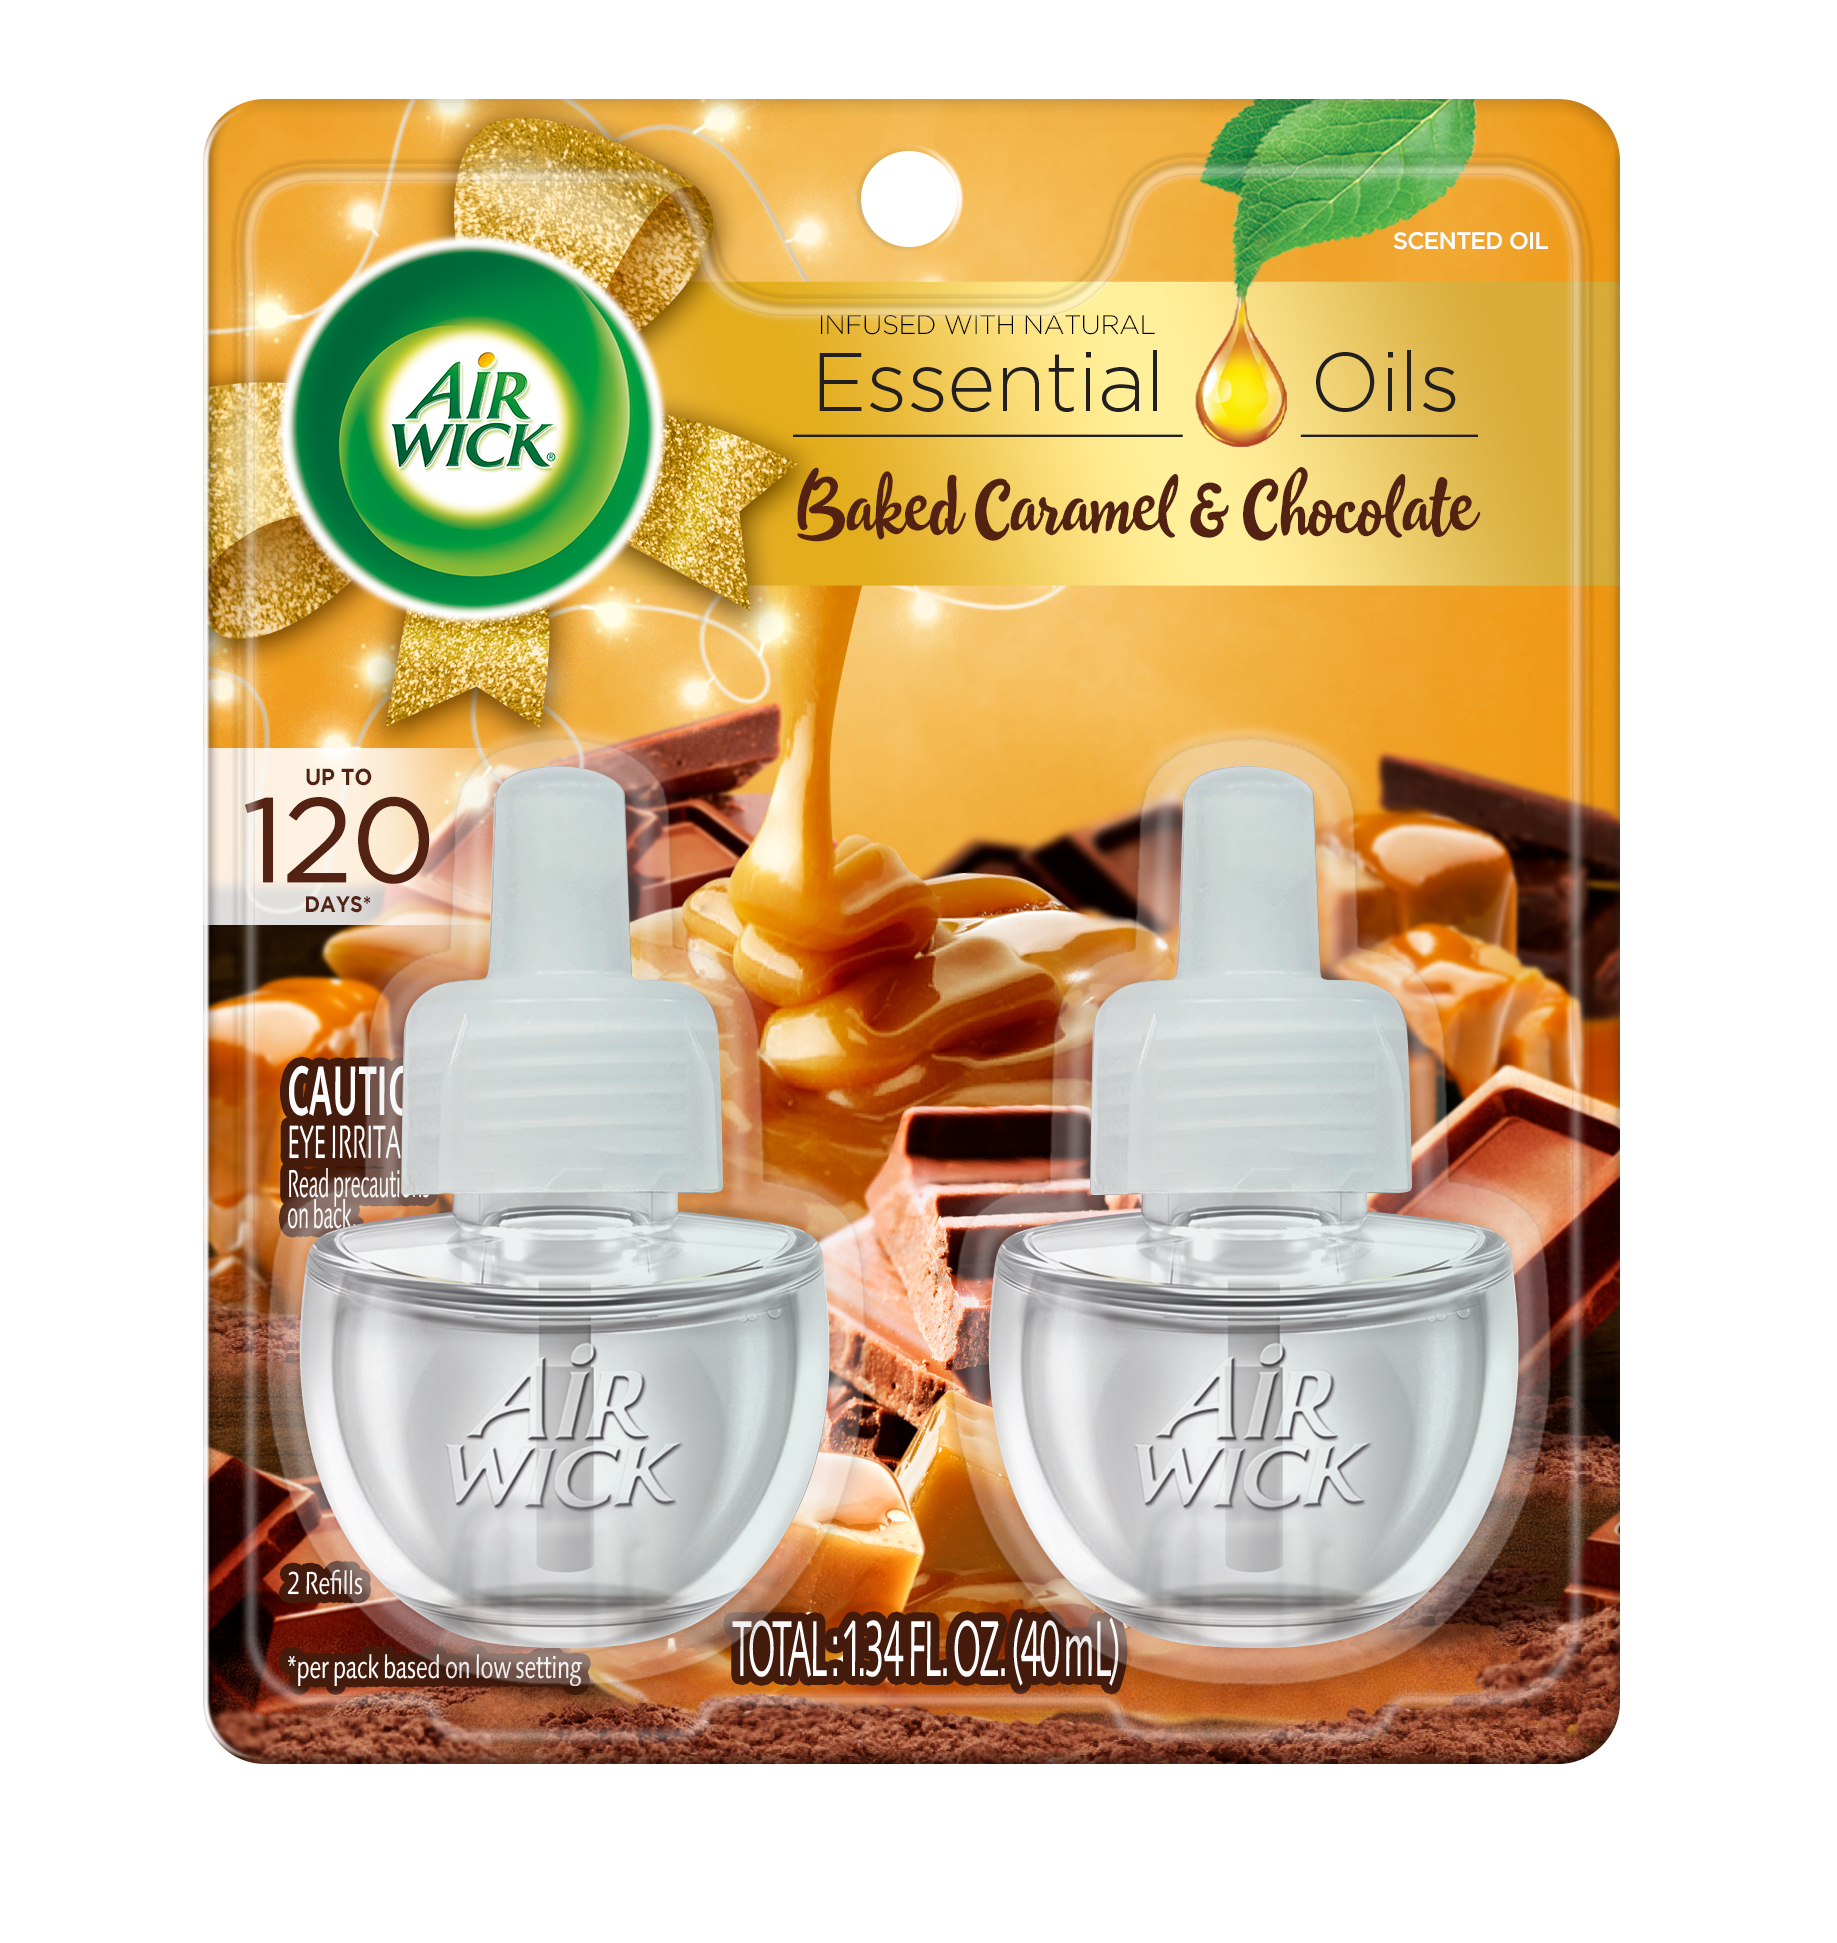 AIR WICK® Scented Oil - Baked Caramel & Chocolate (Discontinued)